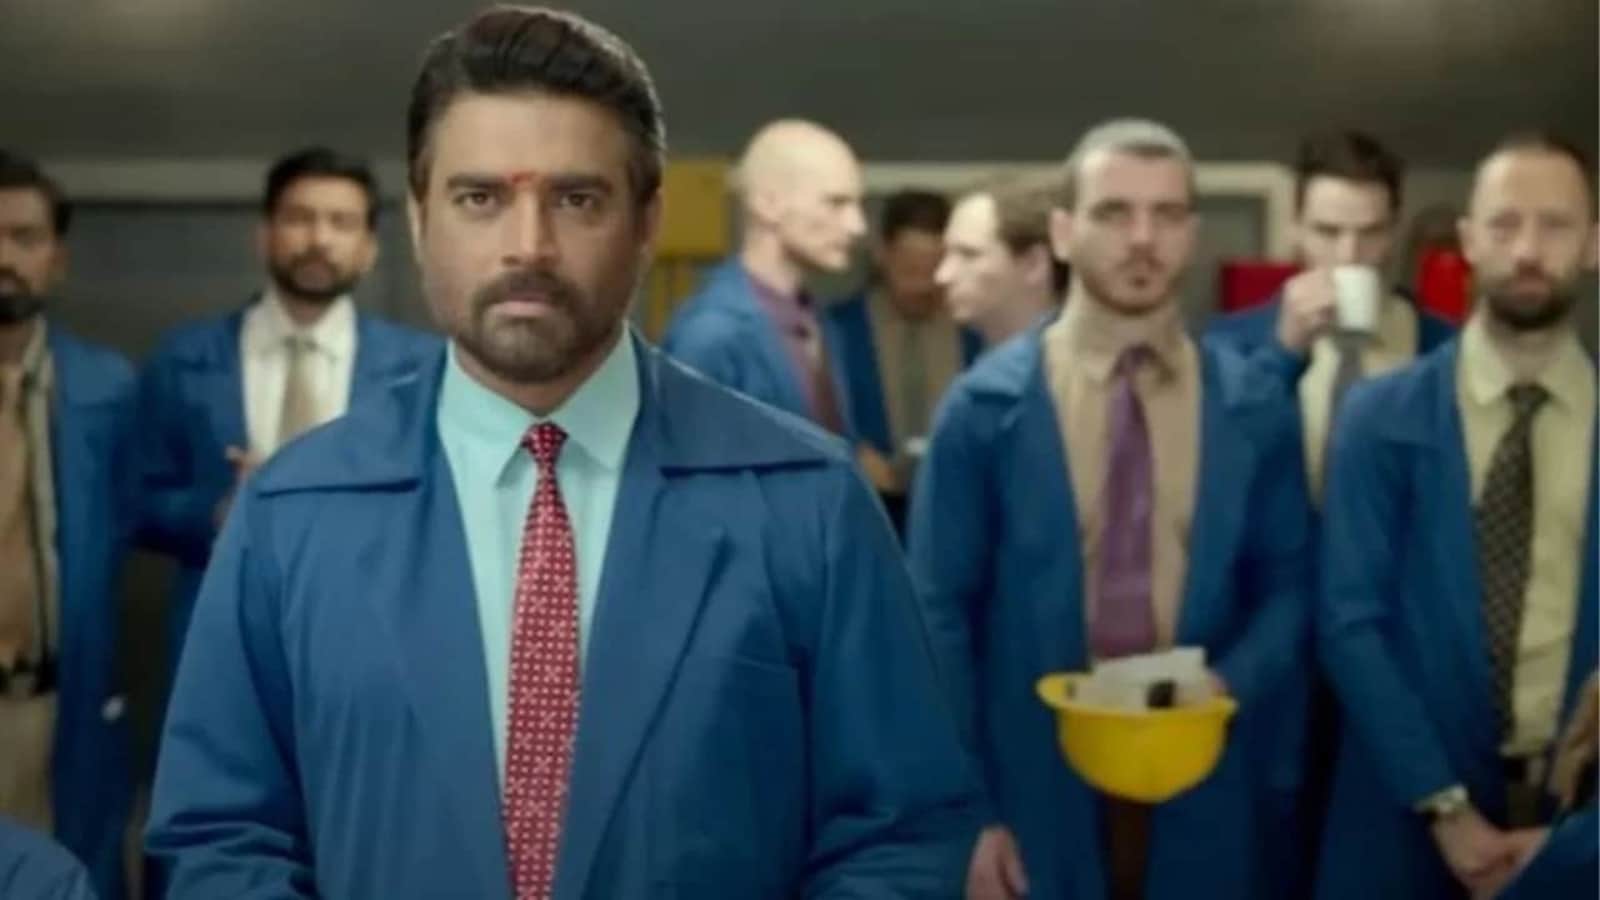 Rocketry The Nambi Effect box office day 1 collection: R Madhavan's film opens to ₹65 lakh haul